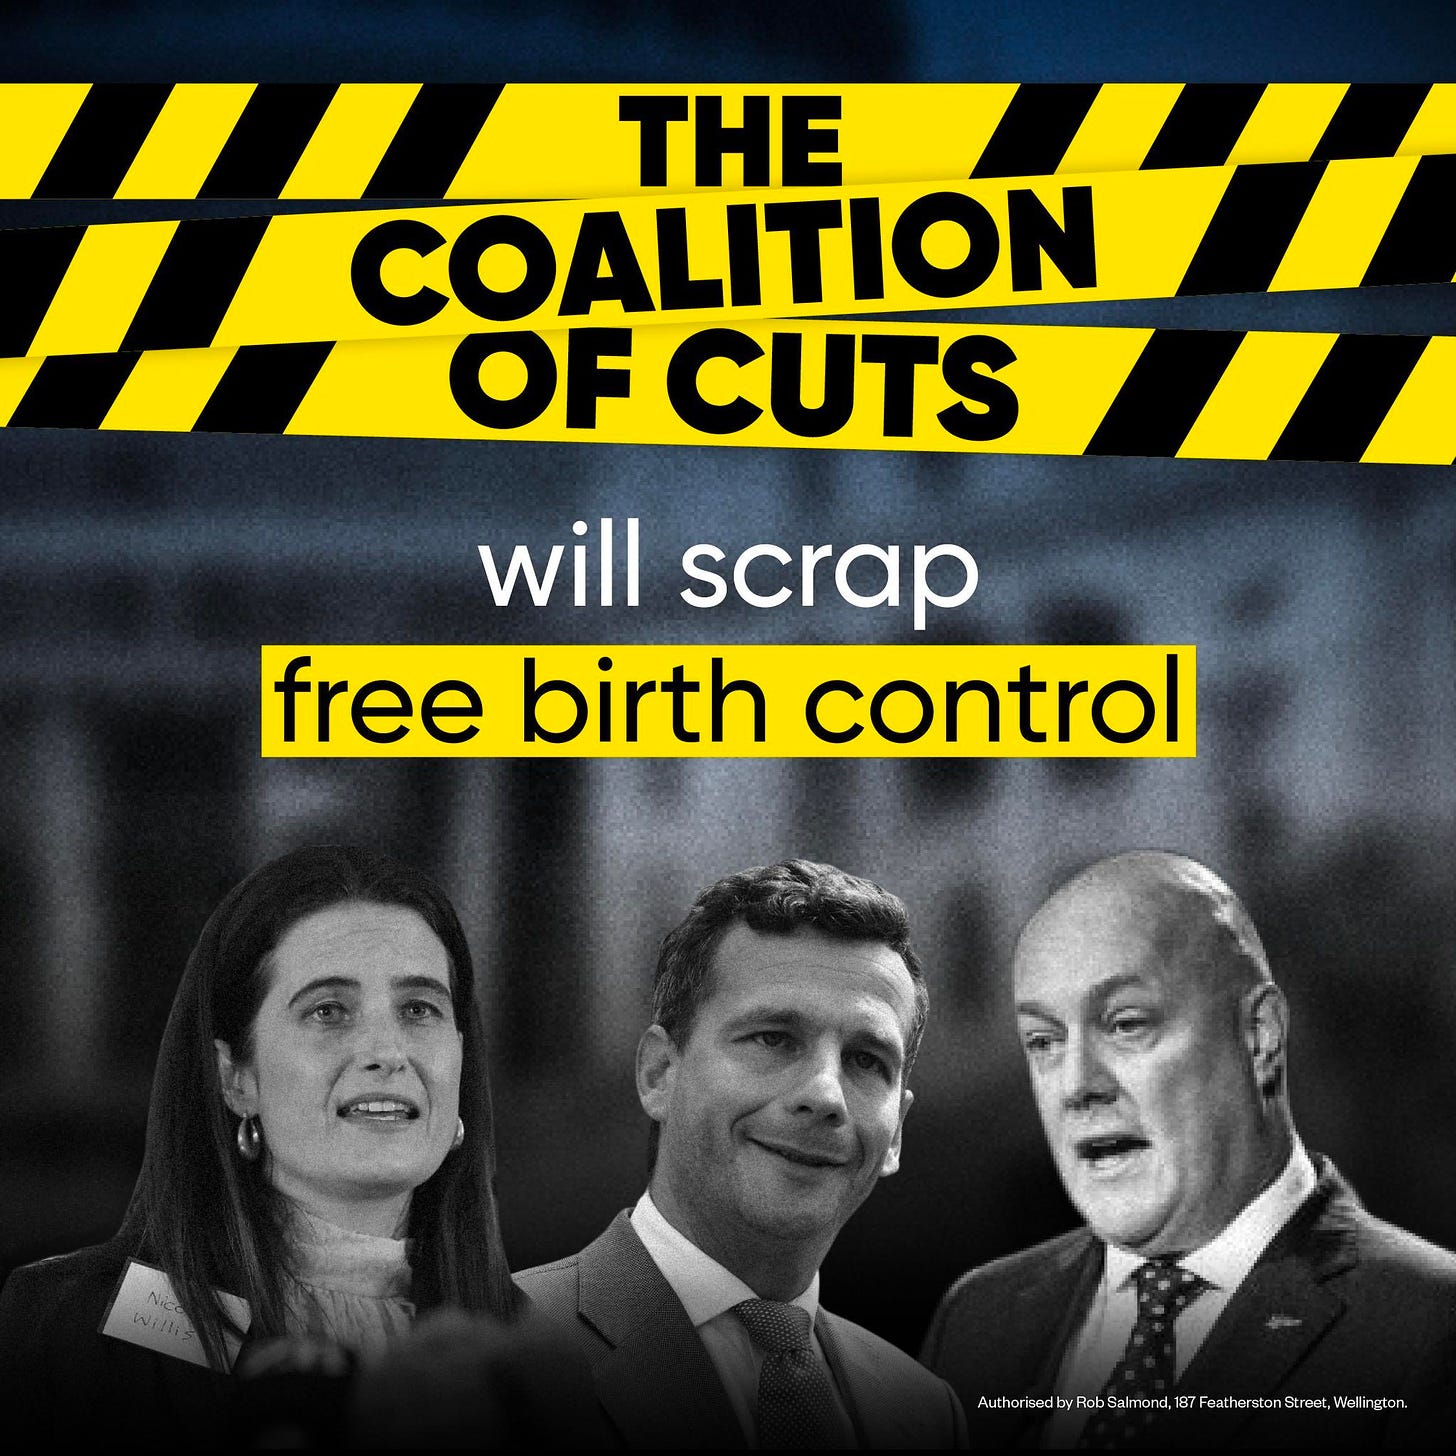 THE COALITION OF CUTS